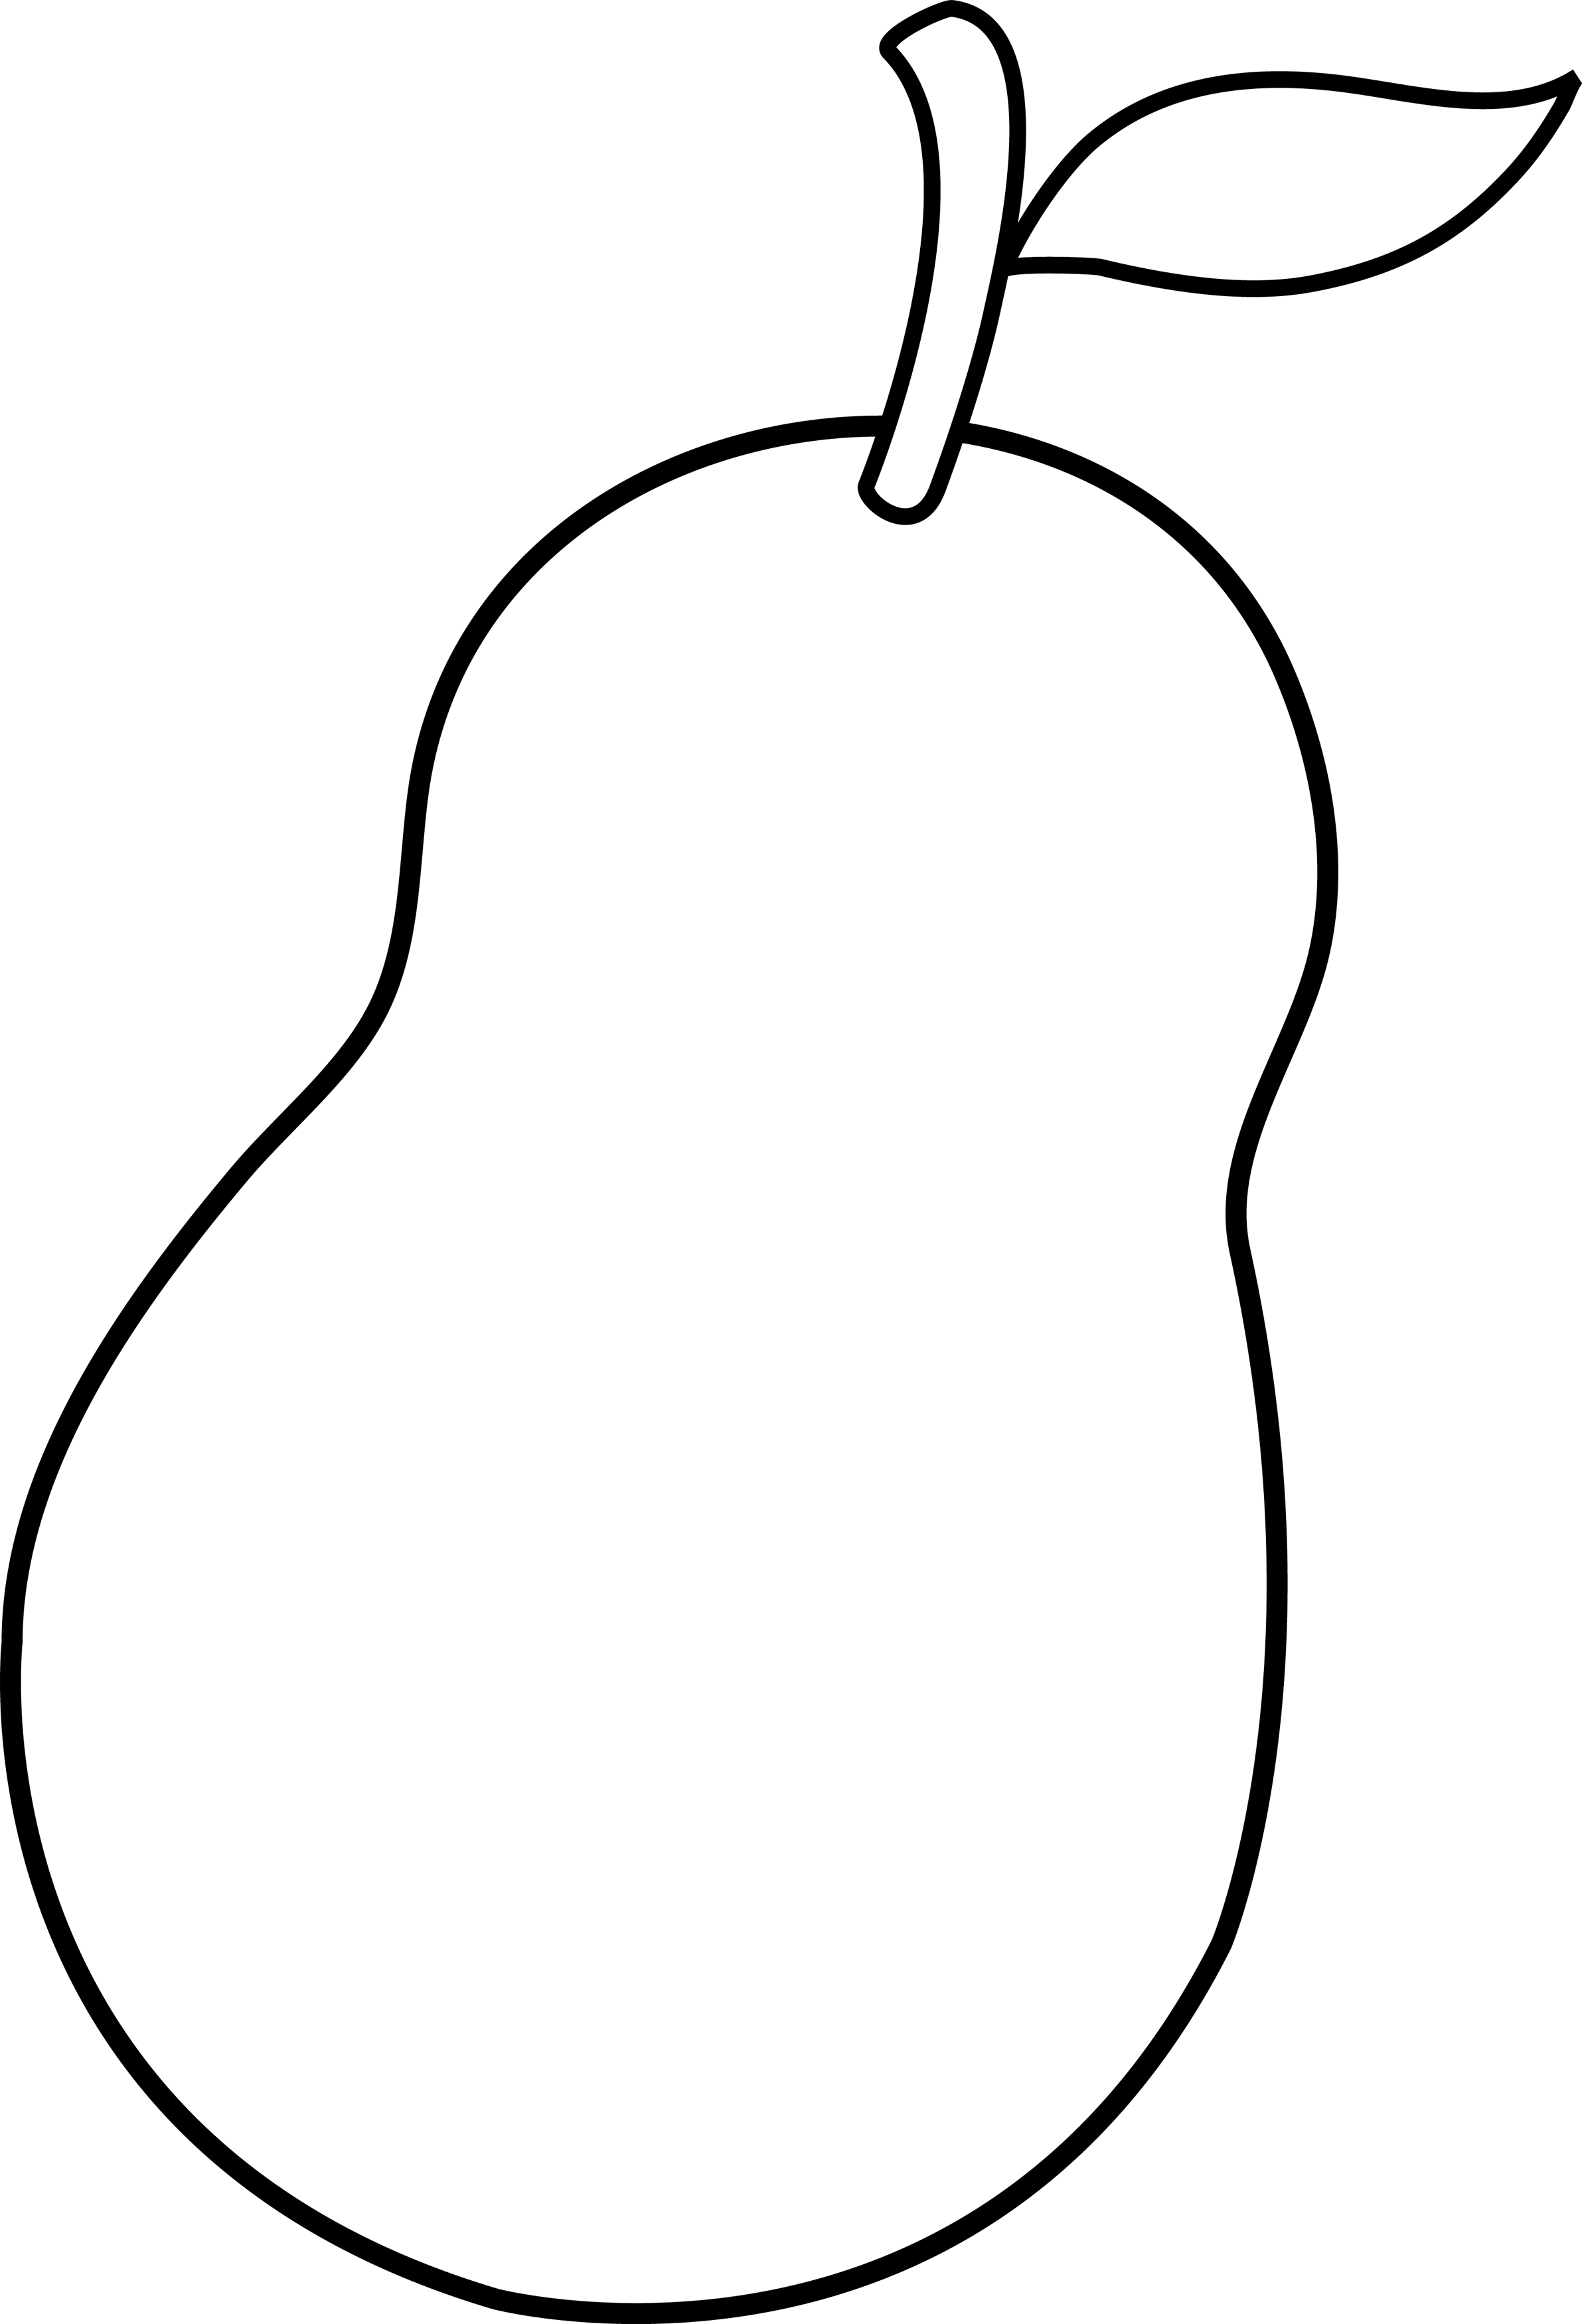 pear-clipart-artistic-pear-artistic-transparent-free-for-download-on